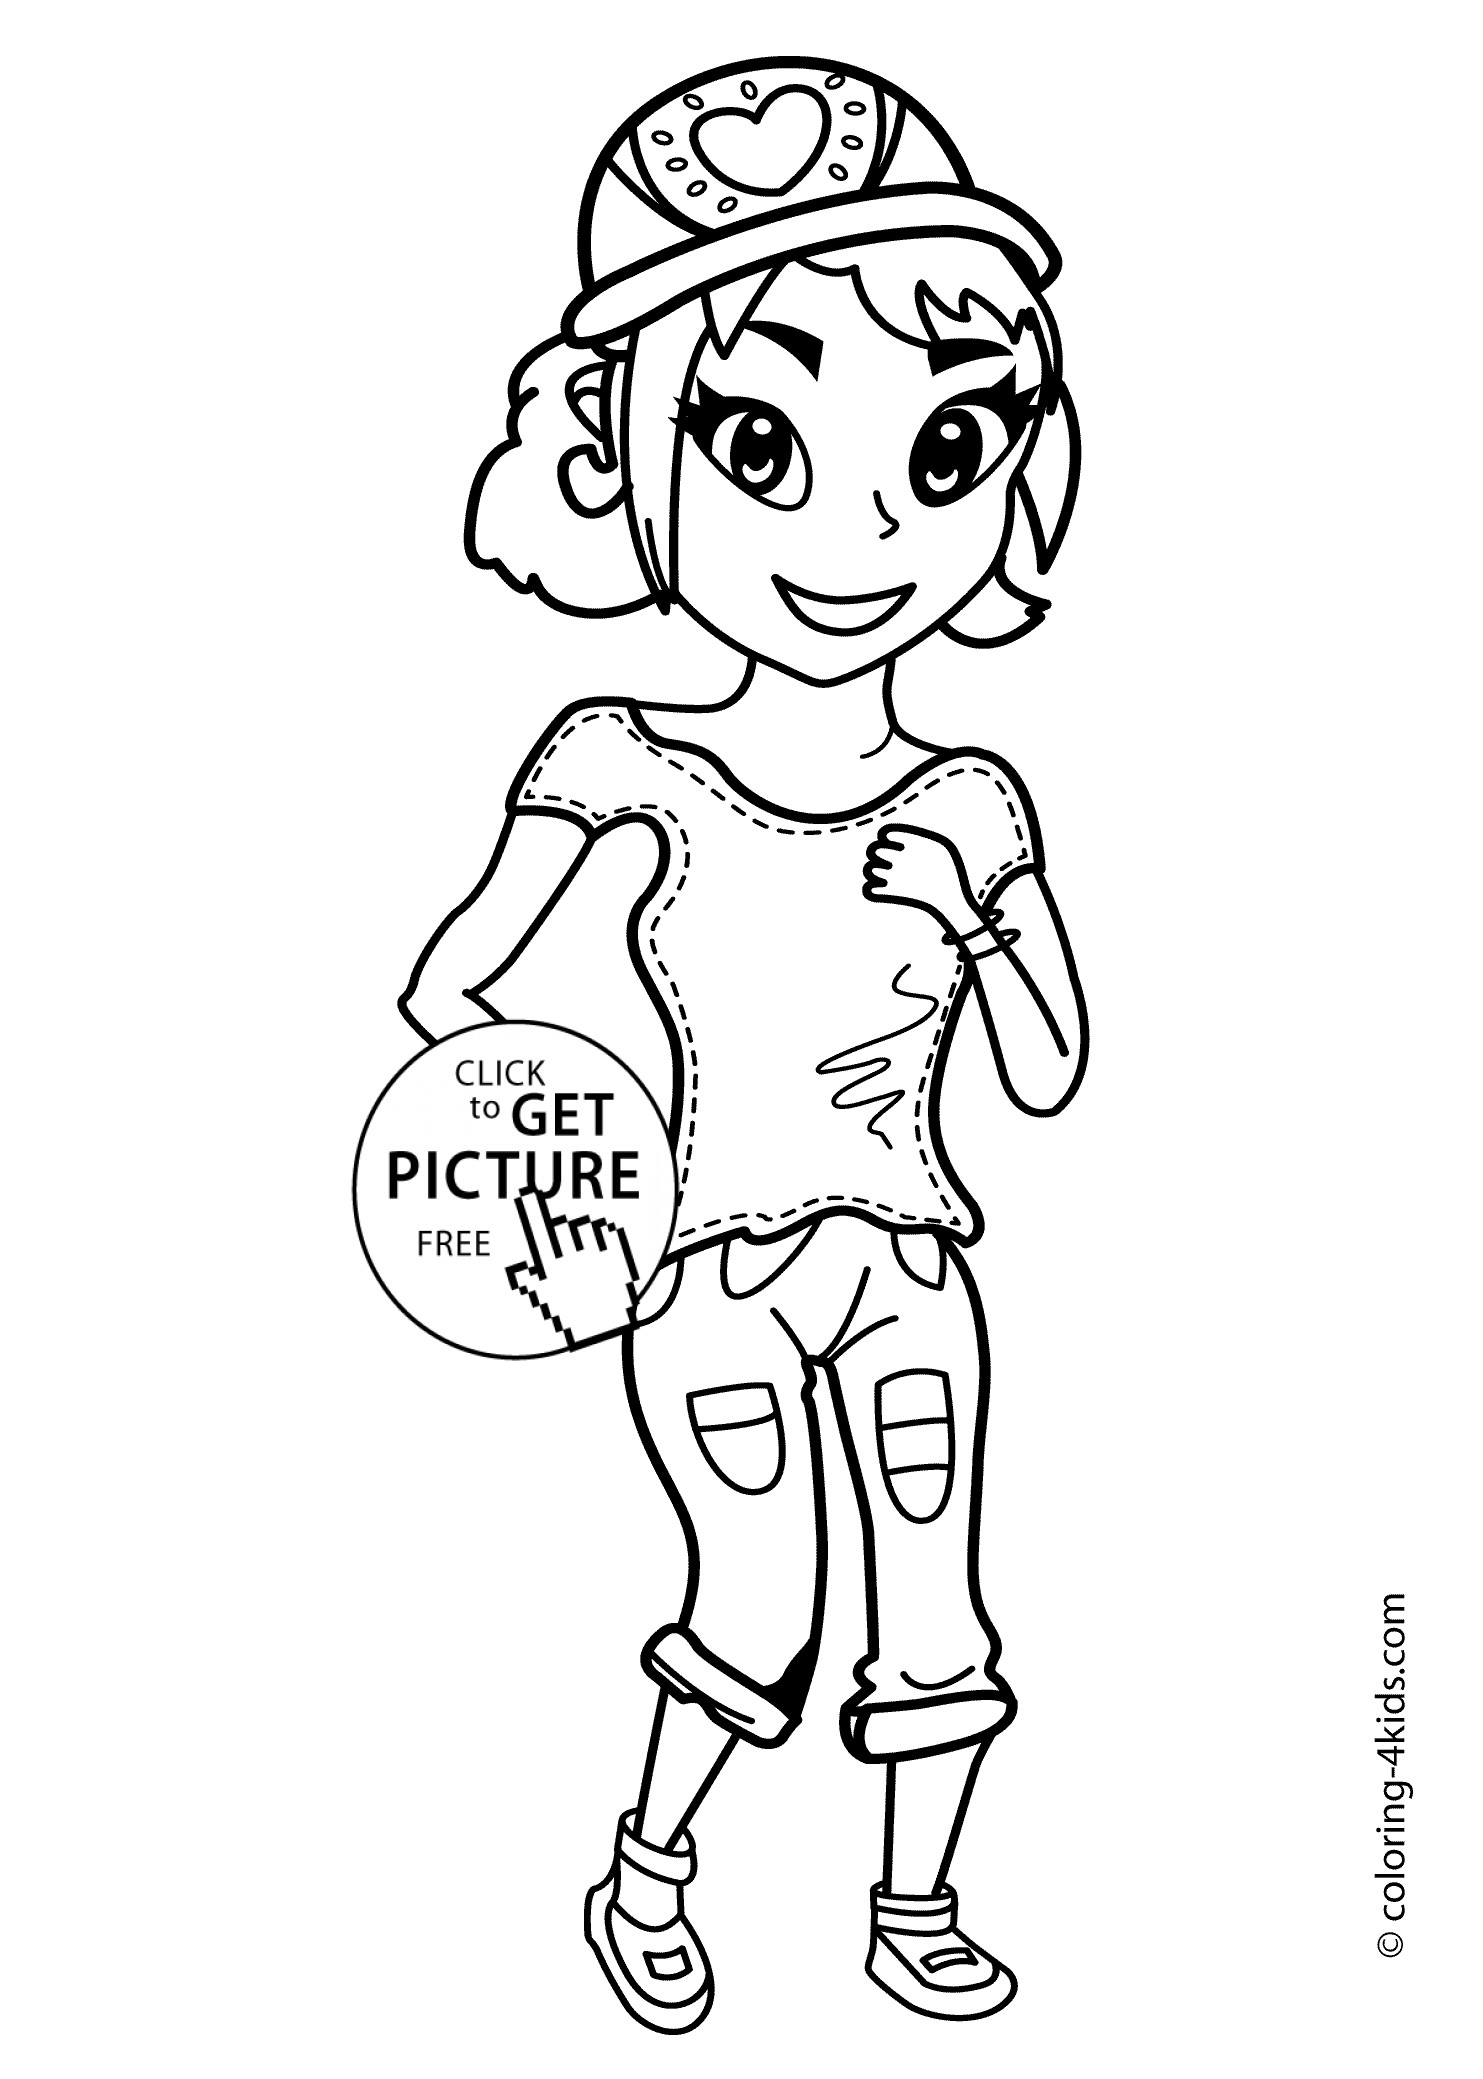 Coloring Pages For Girls Online
 Nice girl coloring pages for girls printable coloring